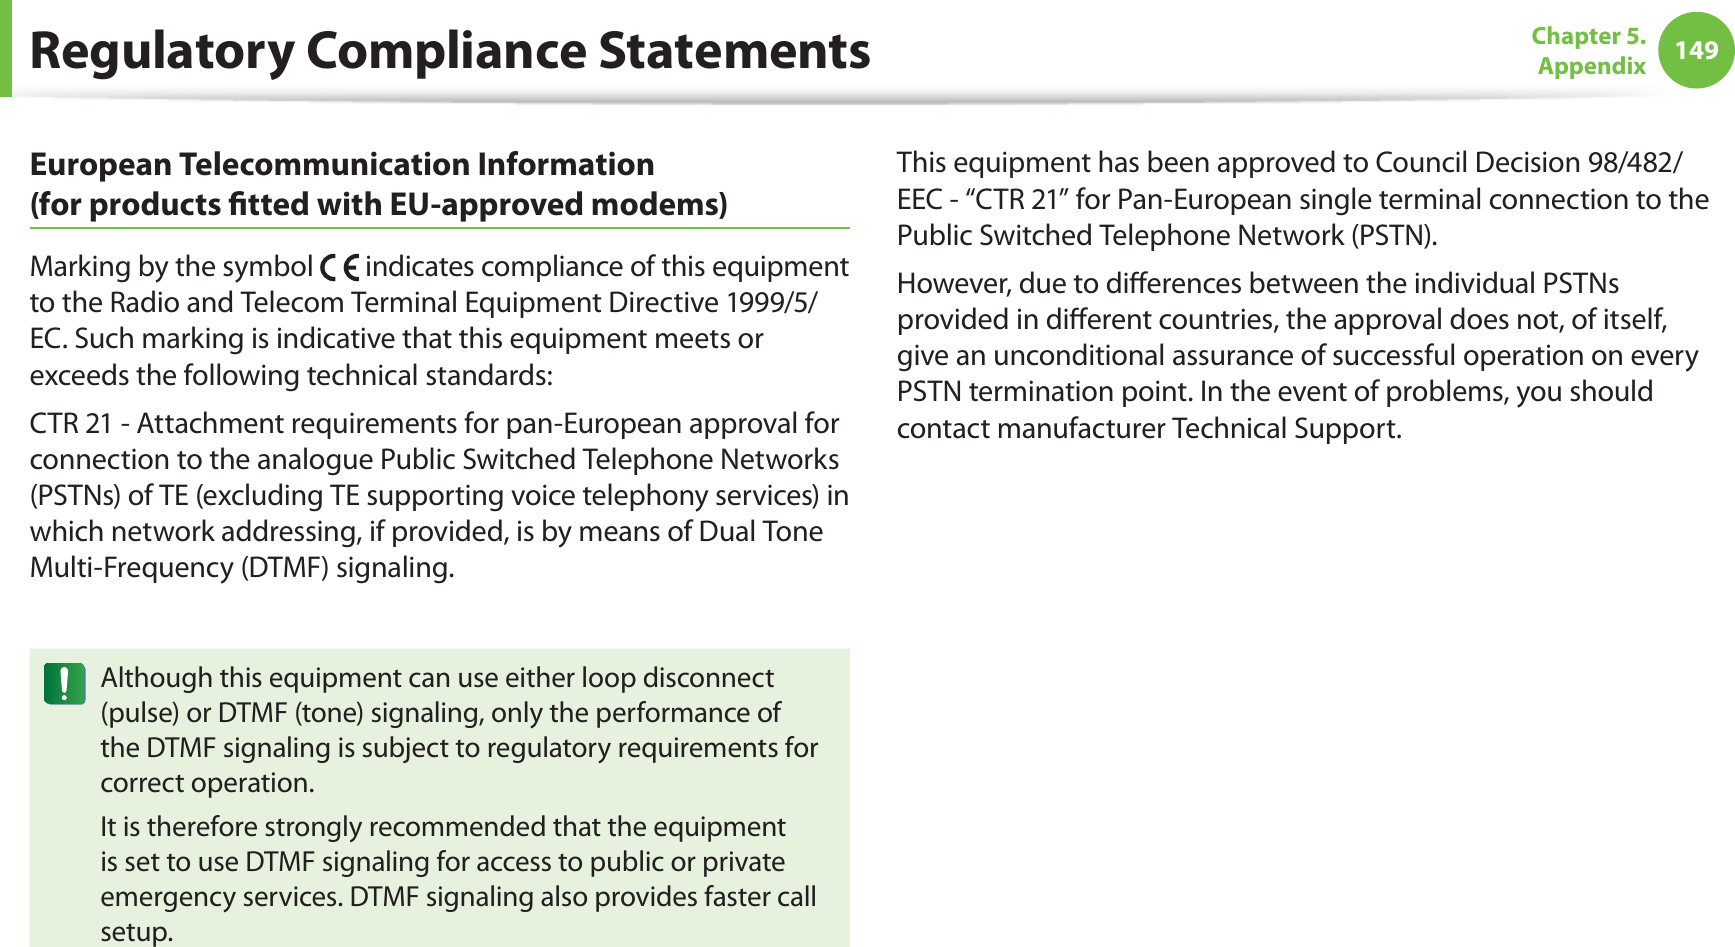 149Chapter 5.  AppendixRegulatory Compliance StatementsEuropean Telecommunication Information  (for products ﬁtted with EU-approved modems)Marking by the symbol   indicates compliance of this equipment to the Radio and Telecom Terminal Equipment Directive 1999/5/EC. Such marking is indicative that this equipment meets or exceeds the following technical standards:CTR 21 - Attachment requirements for pan-European approval for connection to the analogue Public Switched Telephone Networks (PSTNs) of TE (excluding TE supporting voice telephony services) in which network addressing, if provided, is by means of Dual Tone Multi-Frequency (DTMF) signaling.Although this equipment can use either loop disconnect (pulse) or DTMF (tone) signaling, only the performance of the DTMF signaling is subject to regulatory requirements for correct operation.It is therefore strongly recommended that the equipment is set to use DTMF signaling for access to public or private emergency services. DTMF signaling also provides faster call setup.This equipment has been approved to Council Decision 98/482/EEC - “CTR 21” for Pan-European single terminal connection to the Public Switched Telephone Network (PSTN).However, due to diﬀerences between the individual PSTNs provided in diﬀerent countries, the approval does not, of itself, give an unconditional assurance of successful operation on every PSTN termination point. In the event of problems, you should contact manufacturer Technical Support.